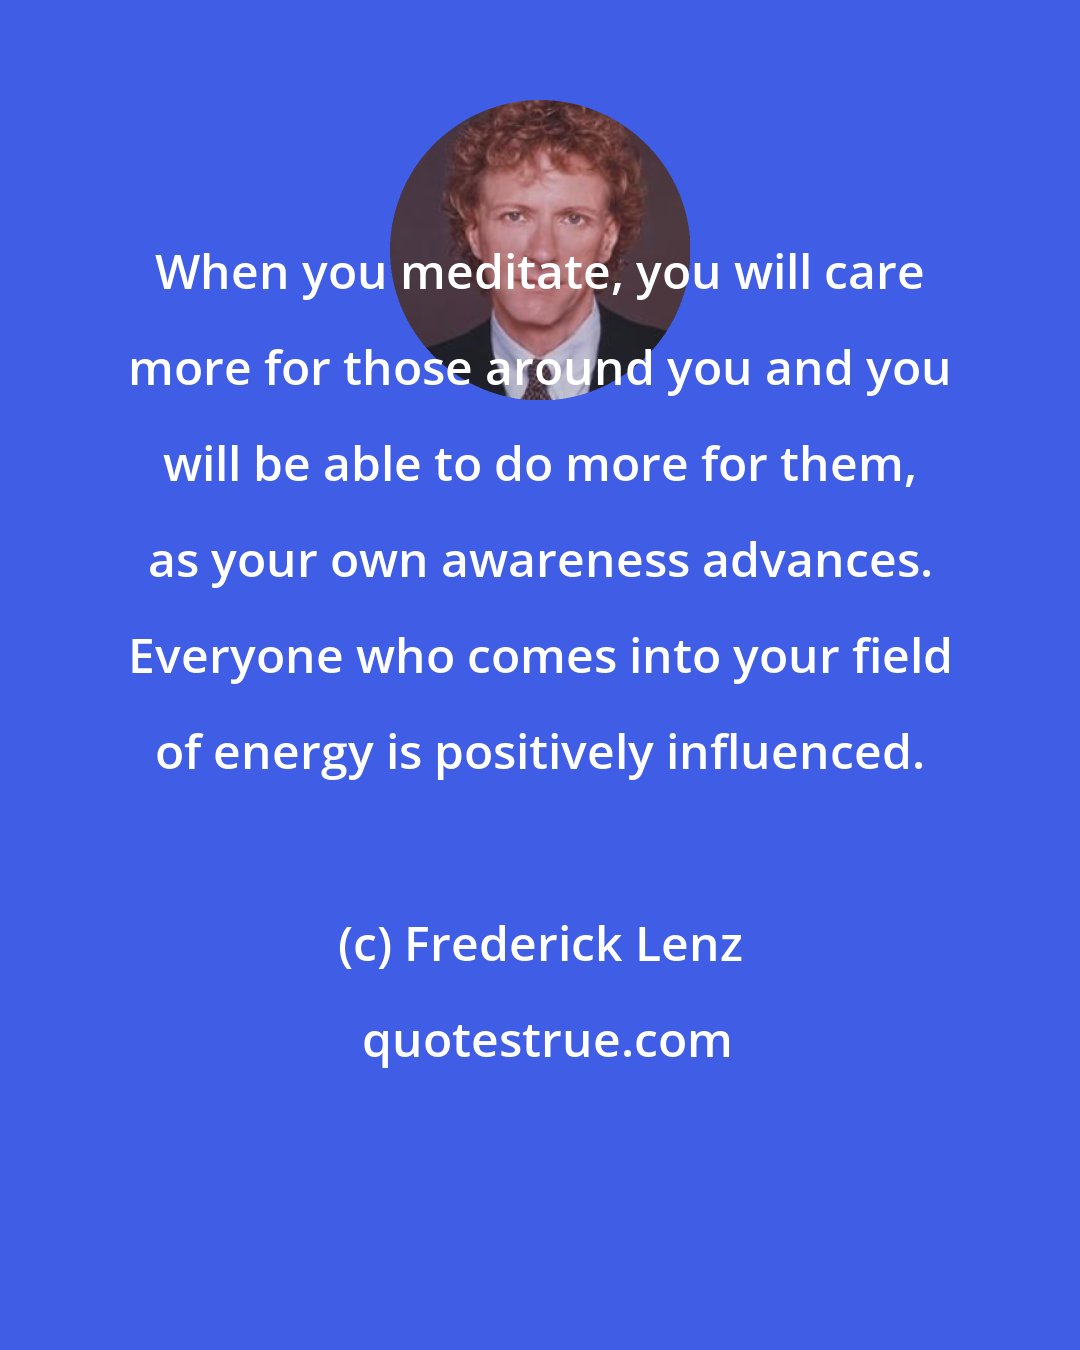 Frederick Lenz: When you meditate, you will care more for those around you and you will be able to do more for them, as your own awareness advances. Everyone who comes into your field of energy is positively influenced.